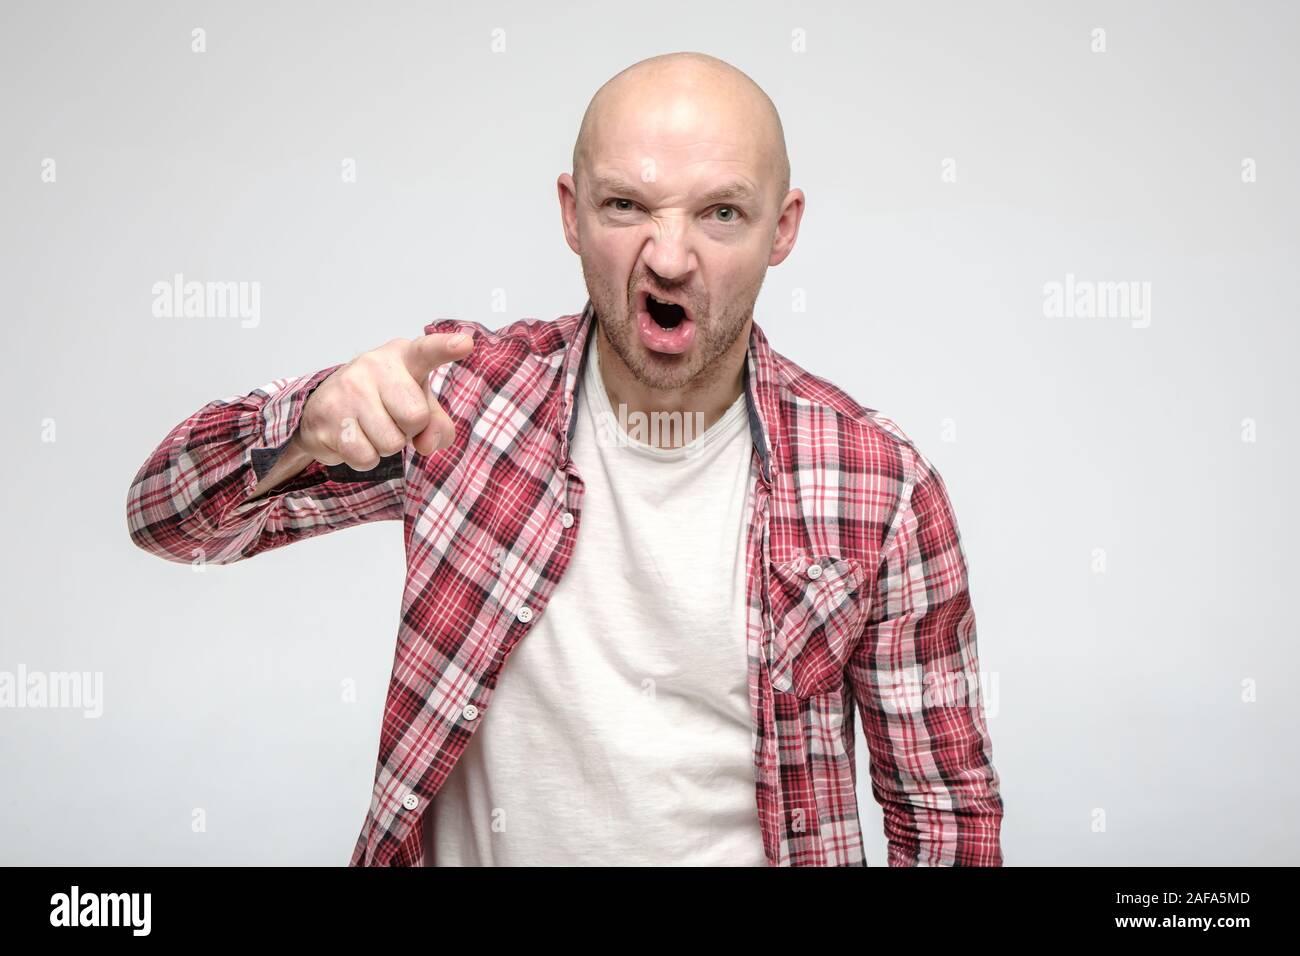 Angry, an aggressive bald man with stubble points index finger at someone and accusing, looking at the camera. Stock Photo